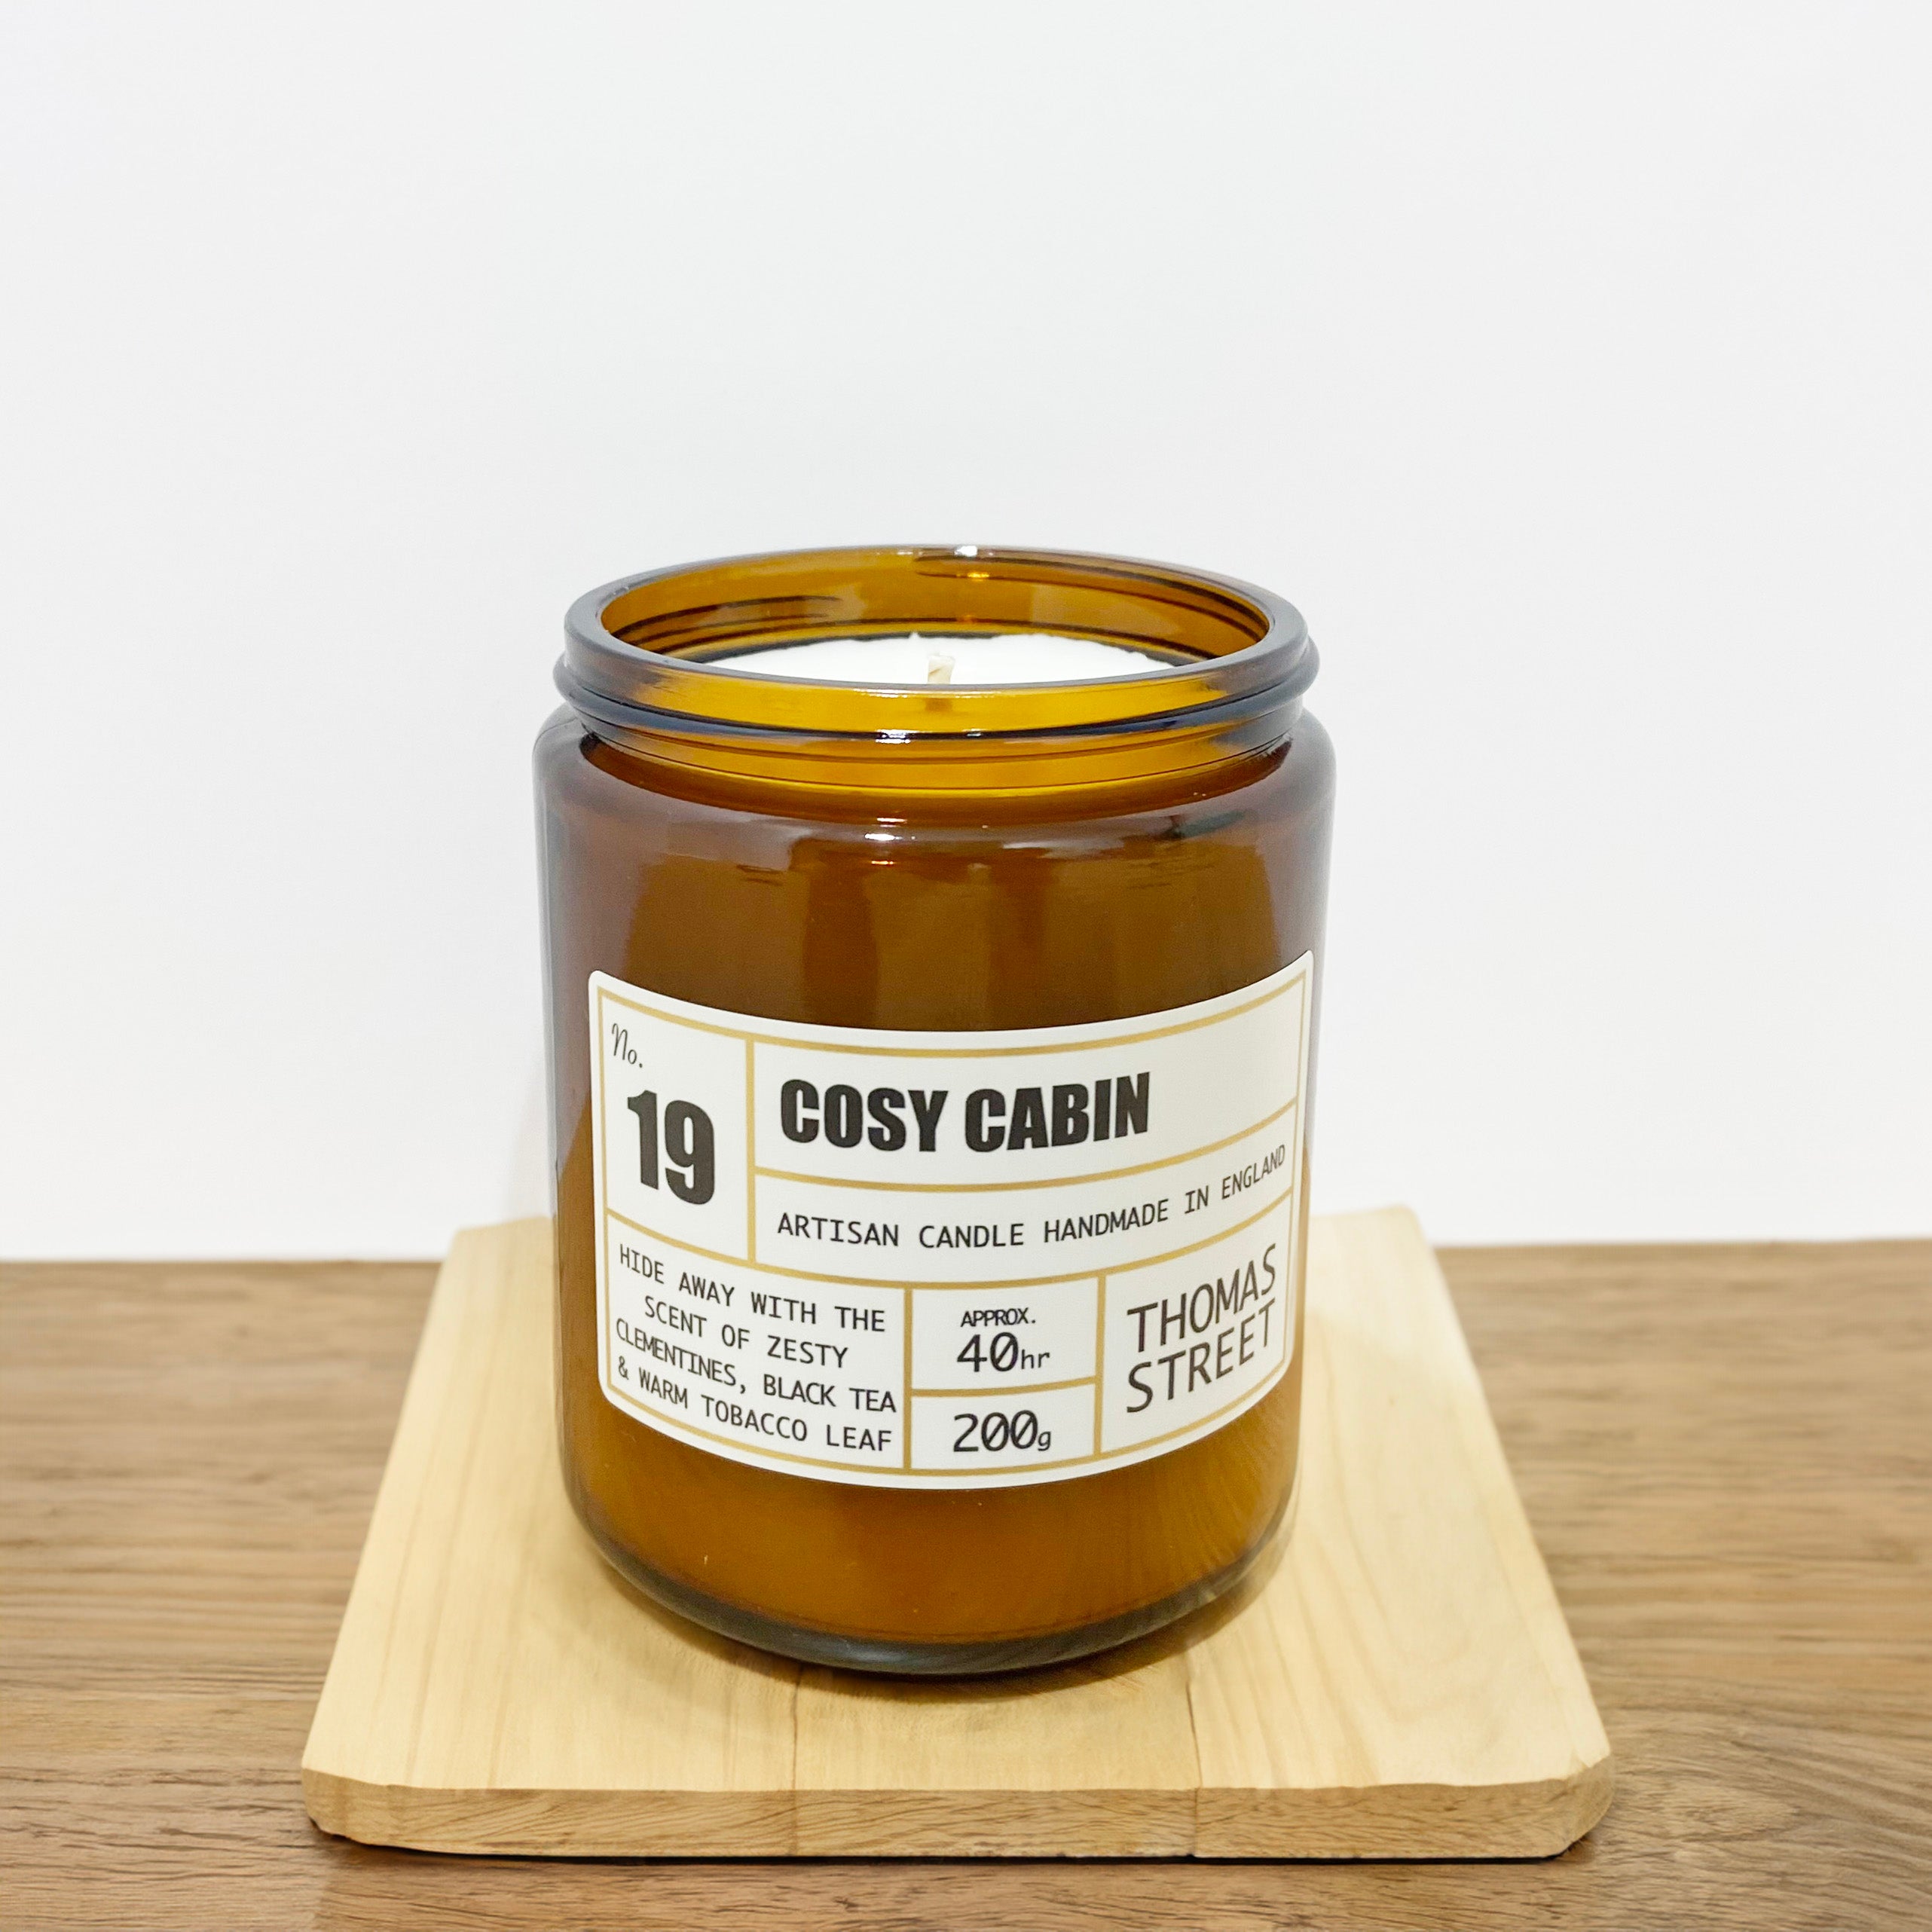 Thomas Street Cosy Cabin Soy Wax Scented Candle